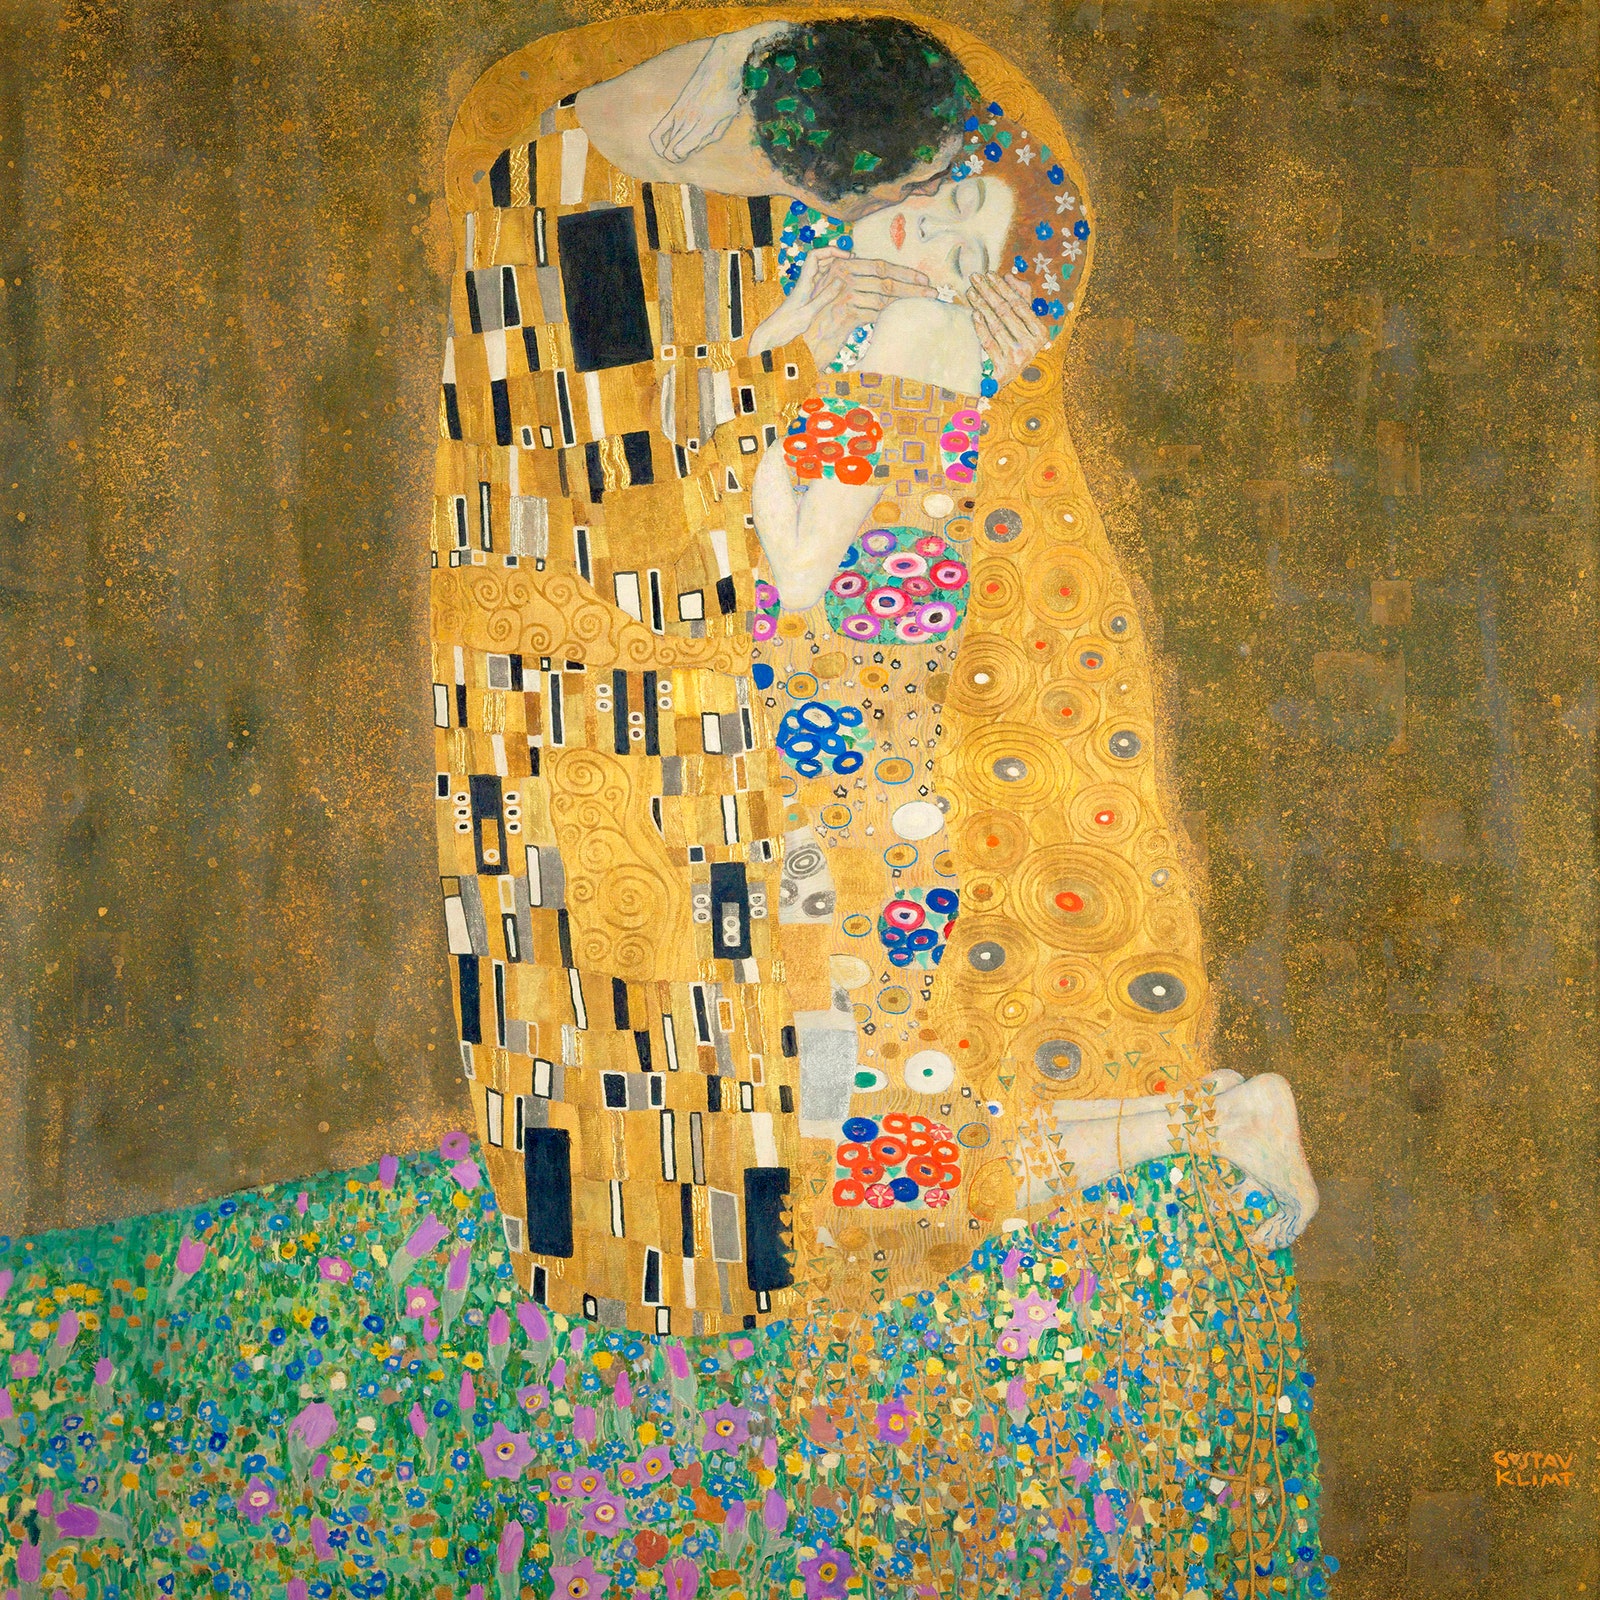 Best of Man kissing woman painting